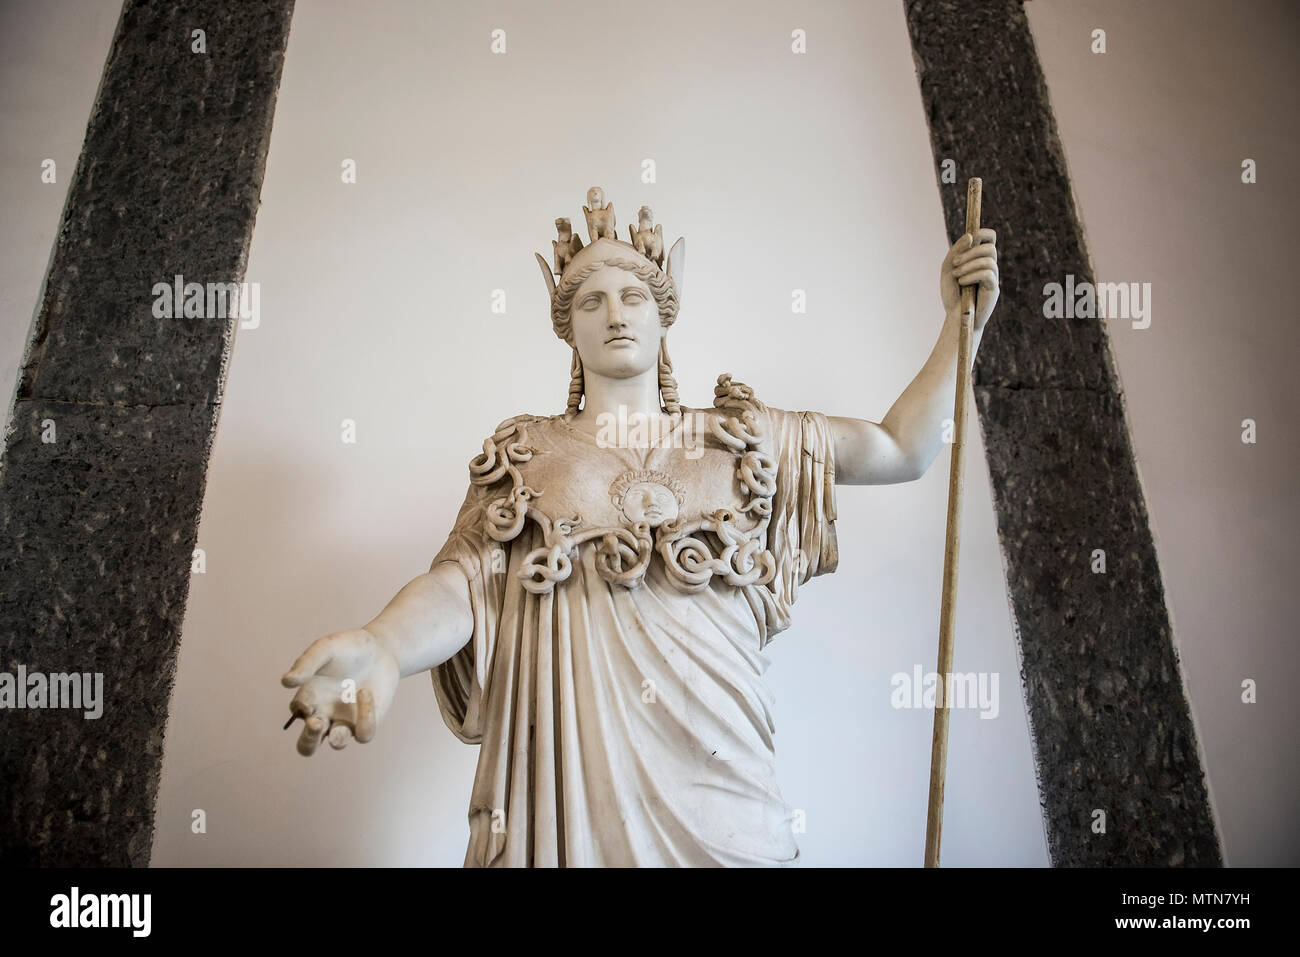 A statue Athena or Athene, the ancient Greek goddess, exhibited inside the Naples Archaelogical Museum in Italy. Stock Photo